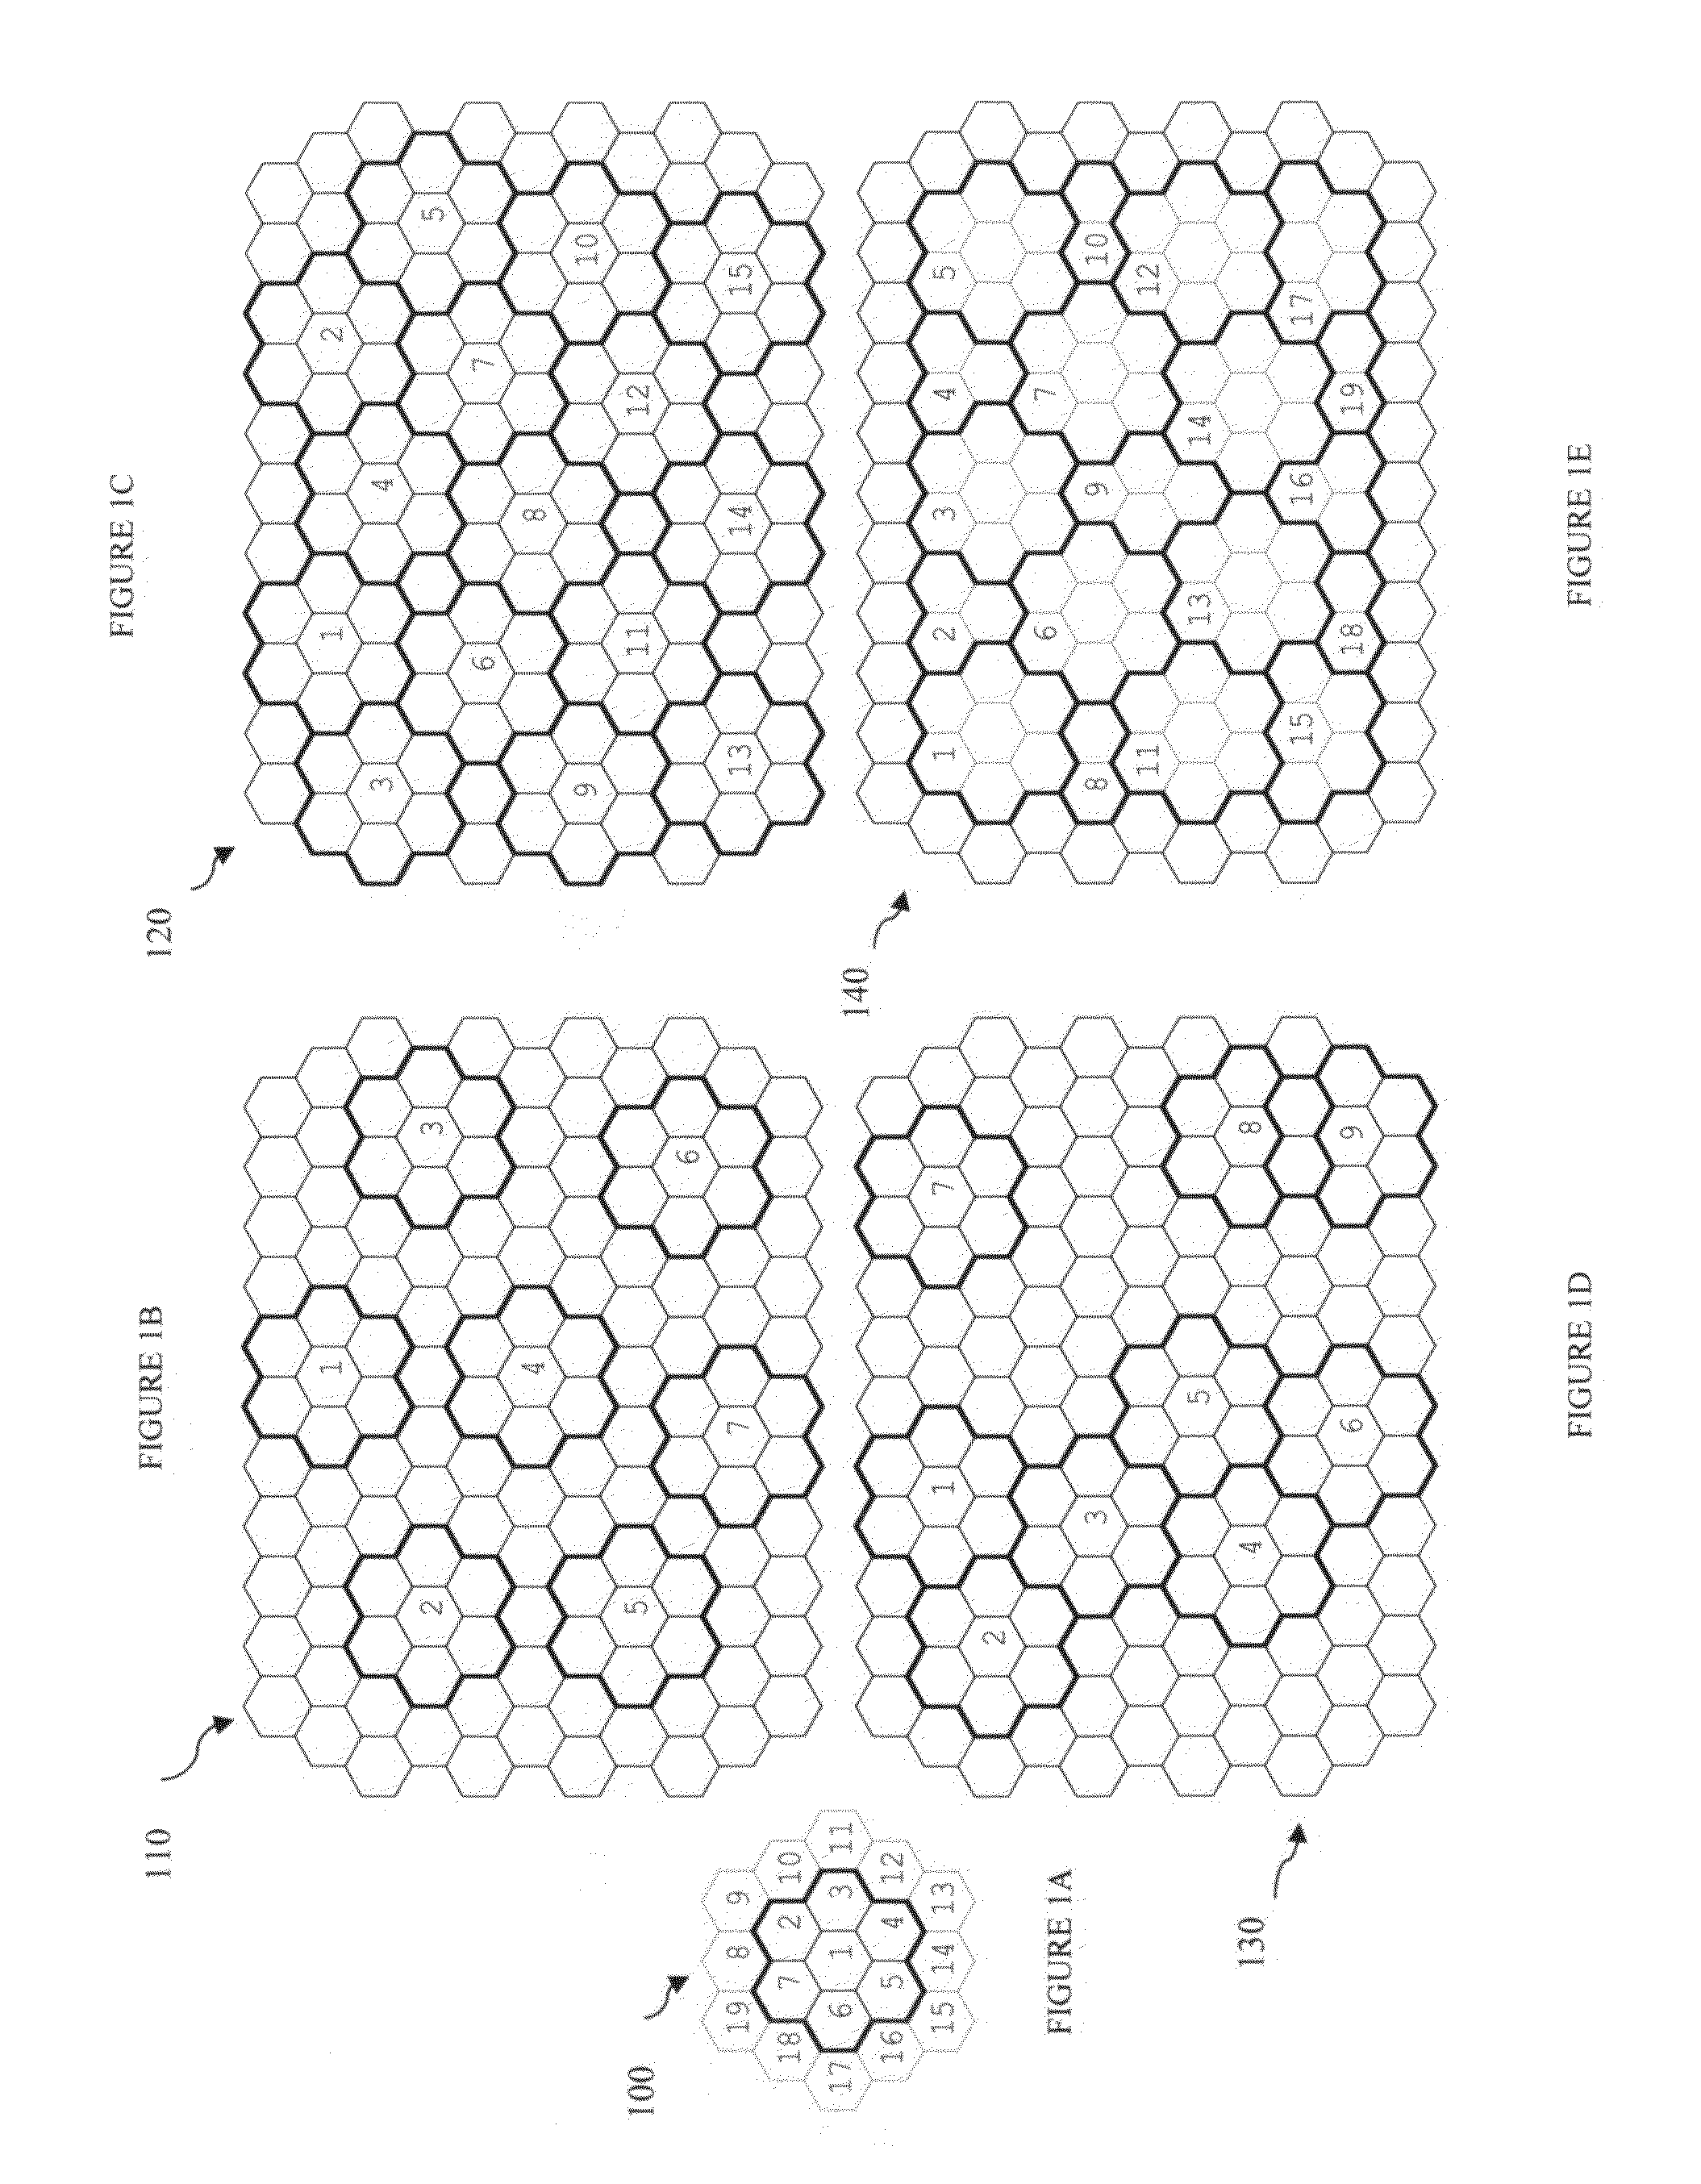 Method and System for Nuclear Imaging Using Multi-Zone Detector Architecture